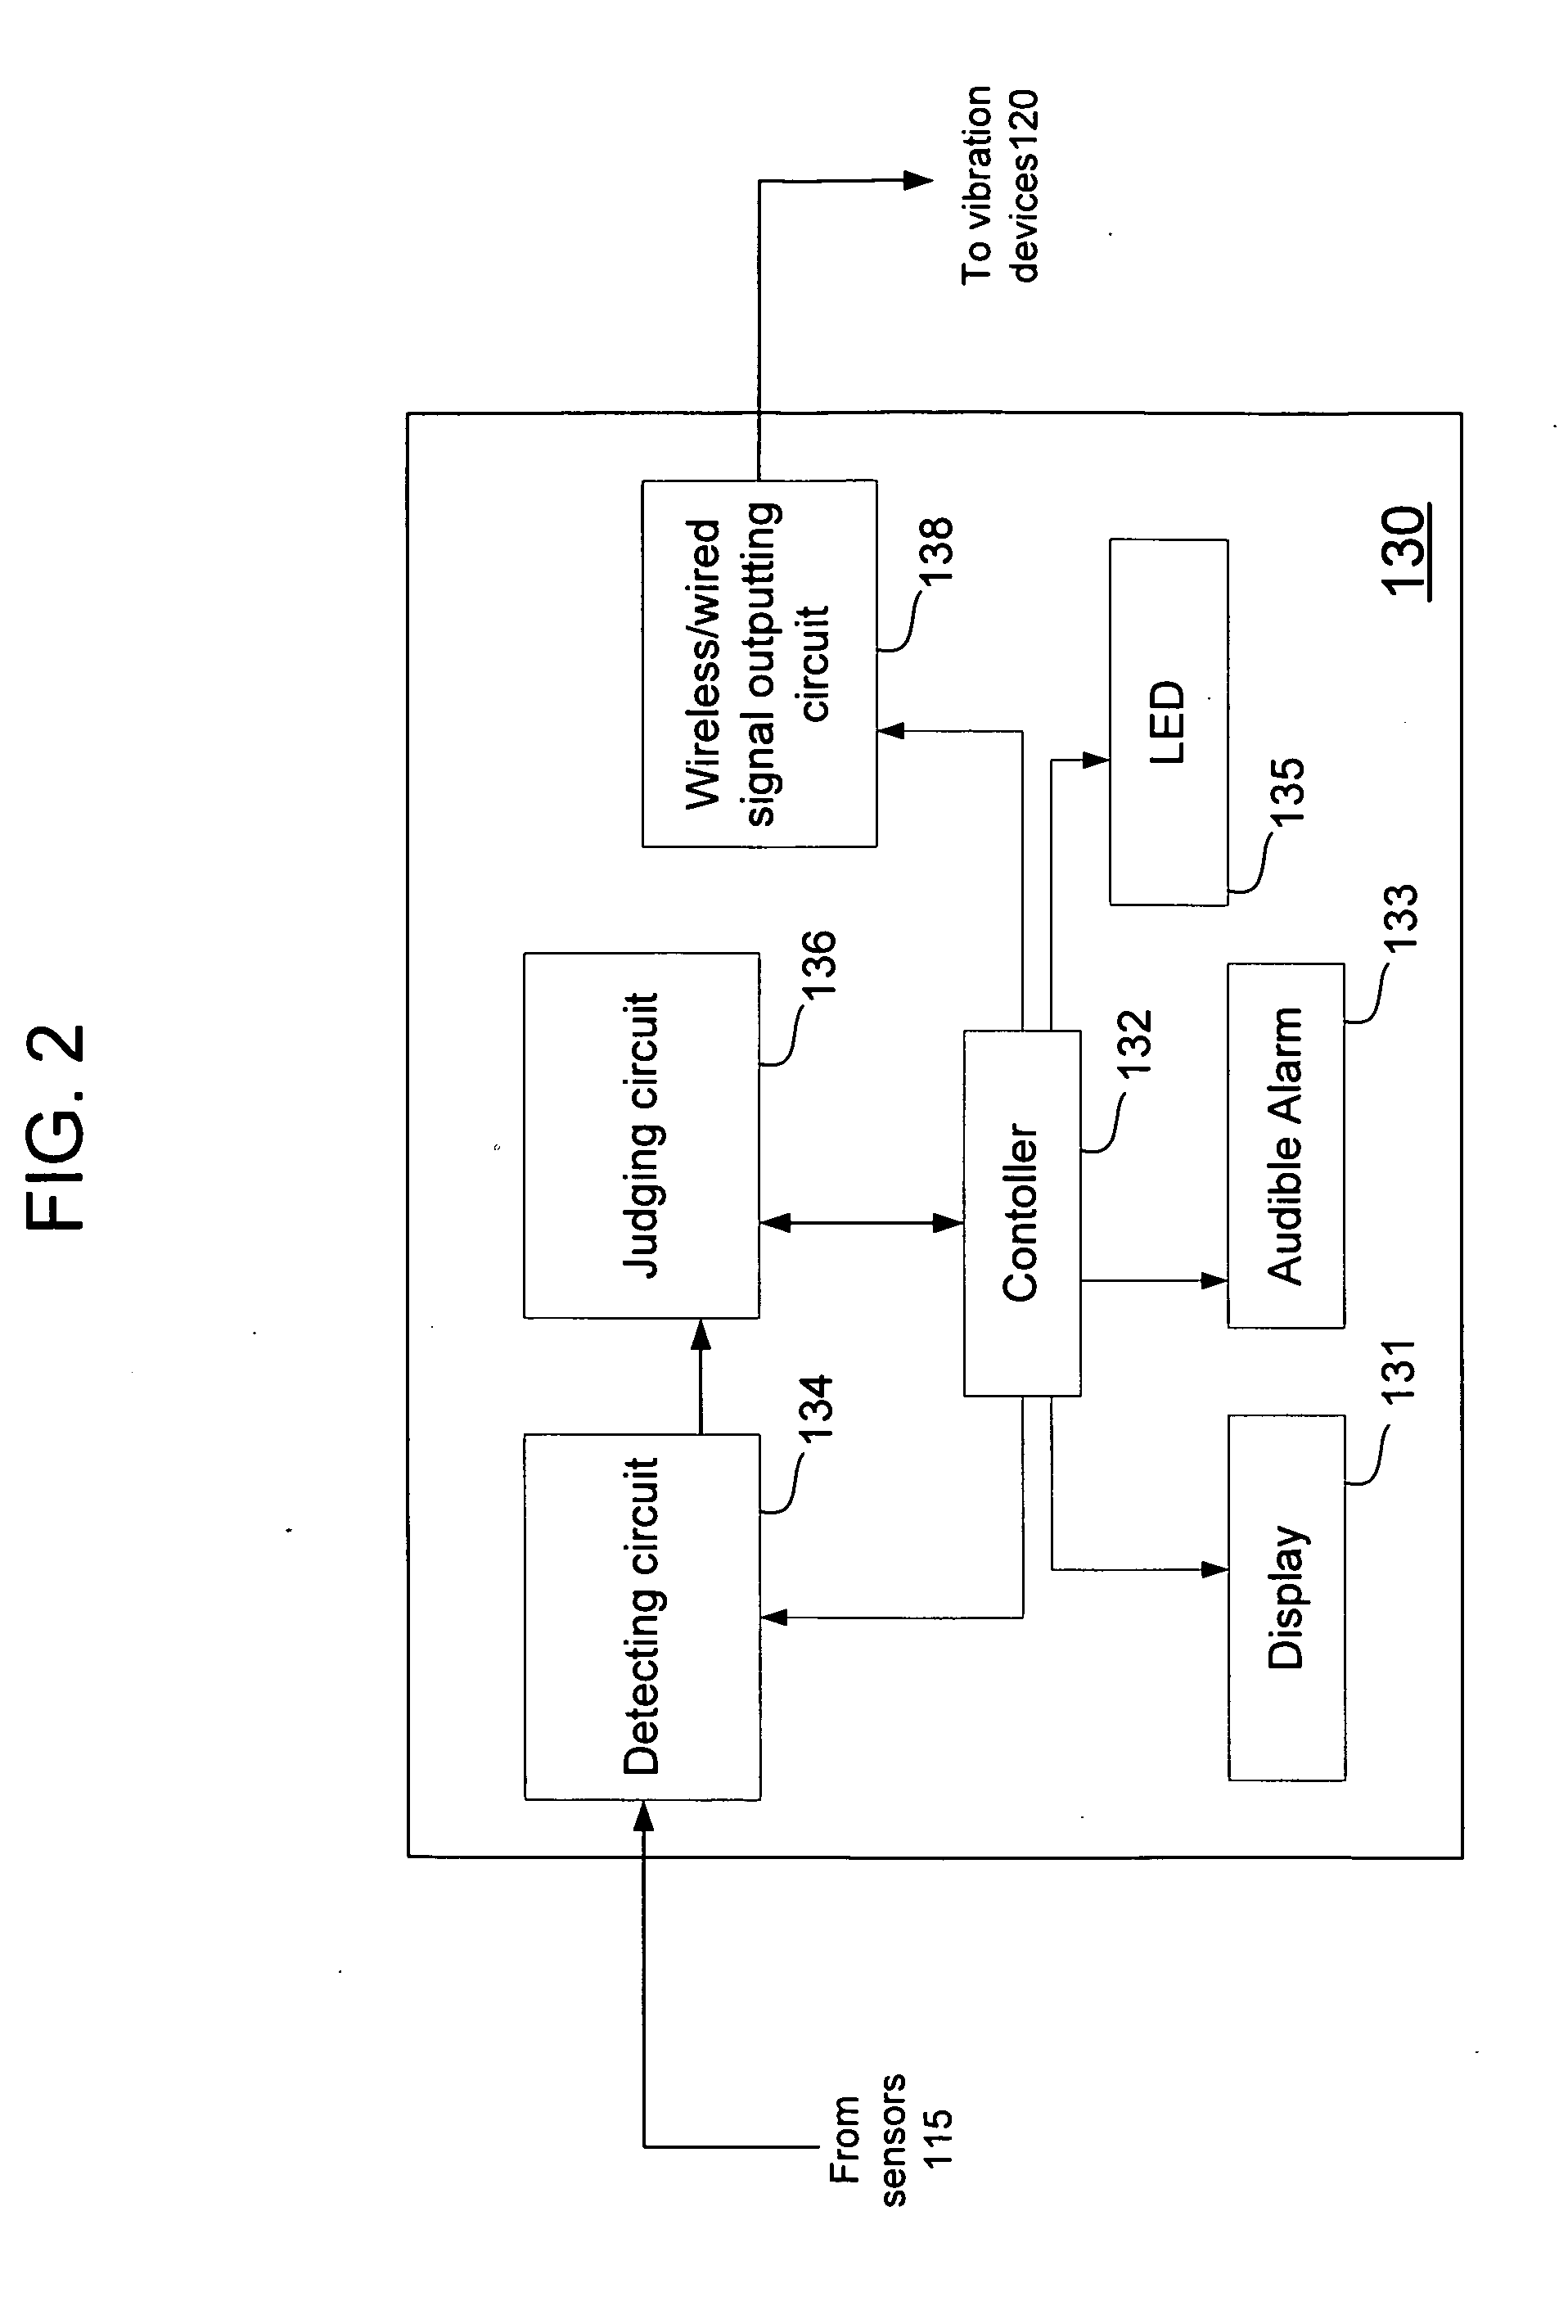 System, pad and method for monitoring a sleeping person to detect an apnea state condition